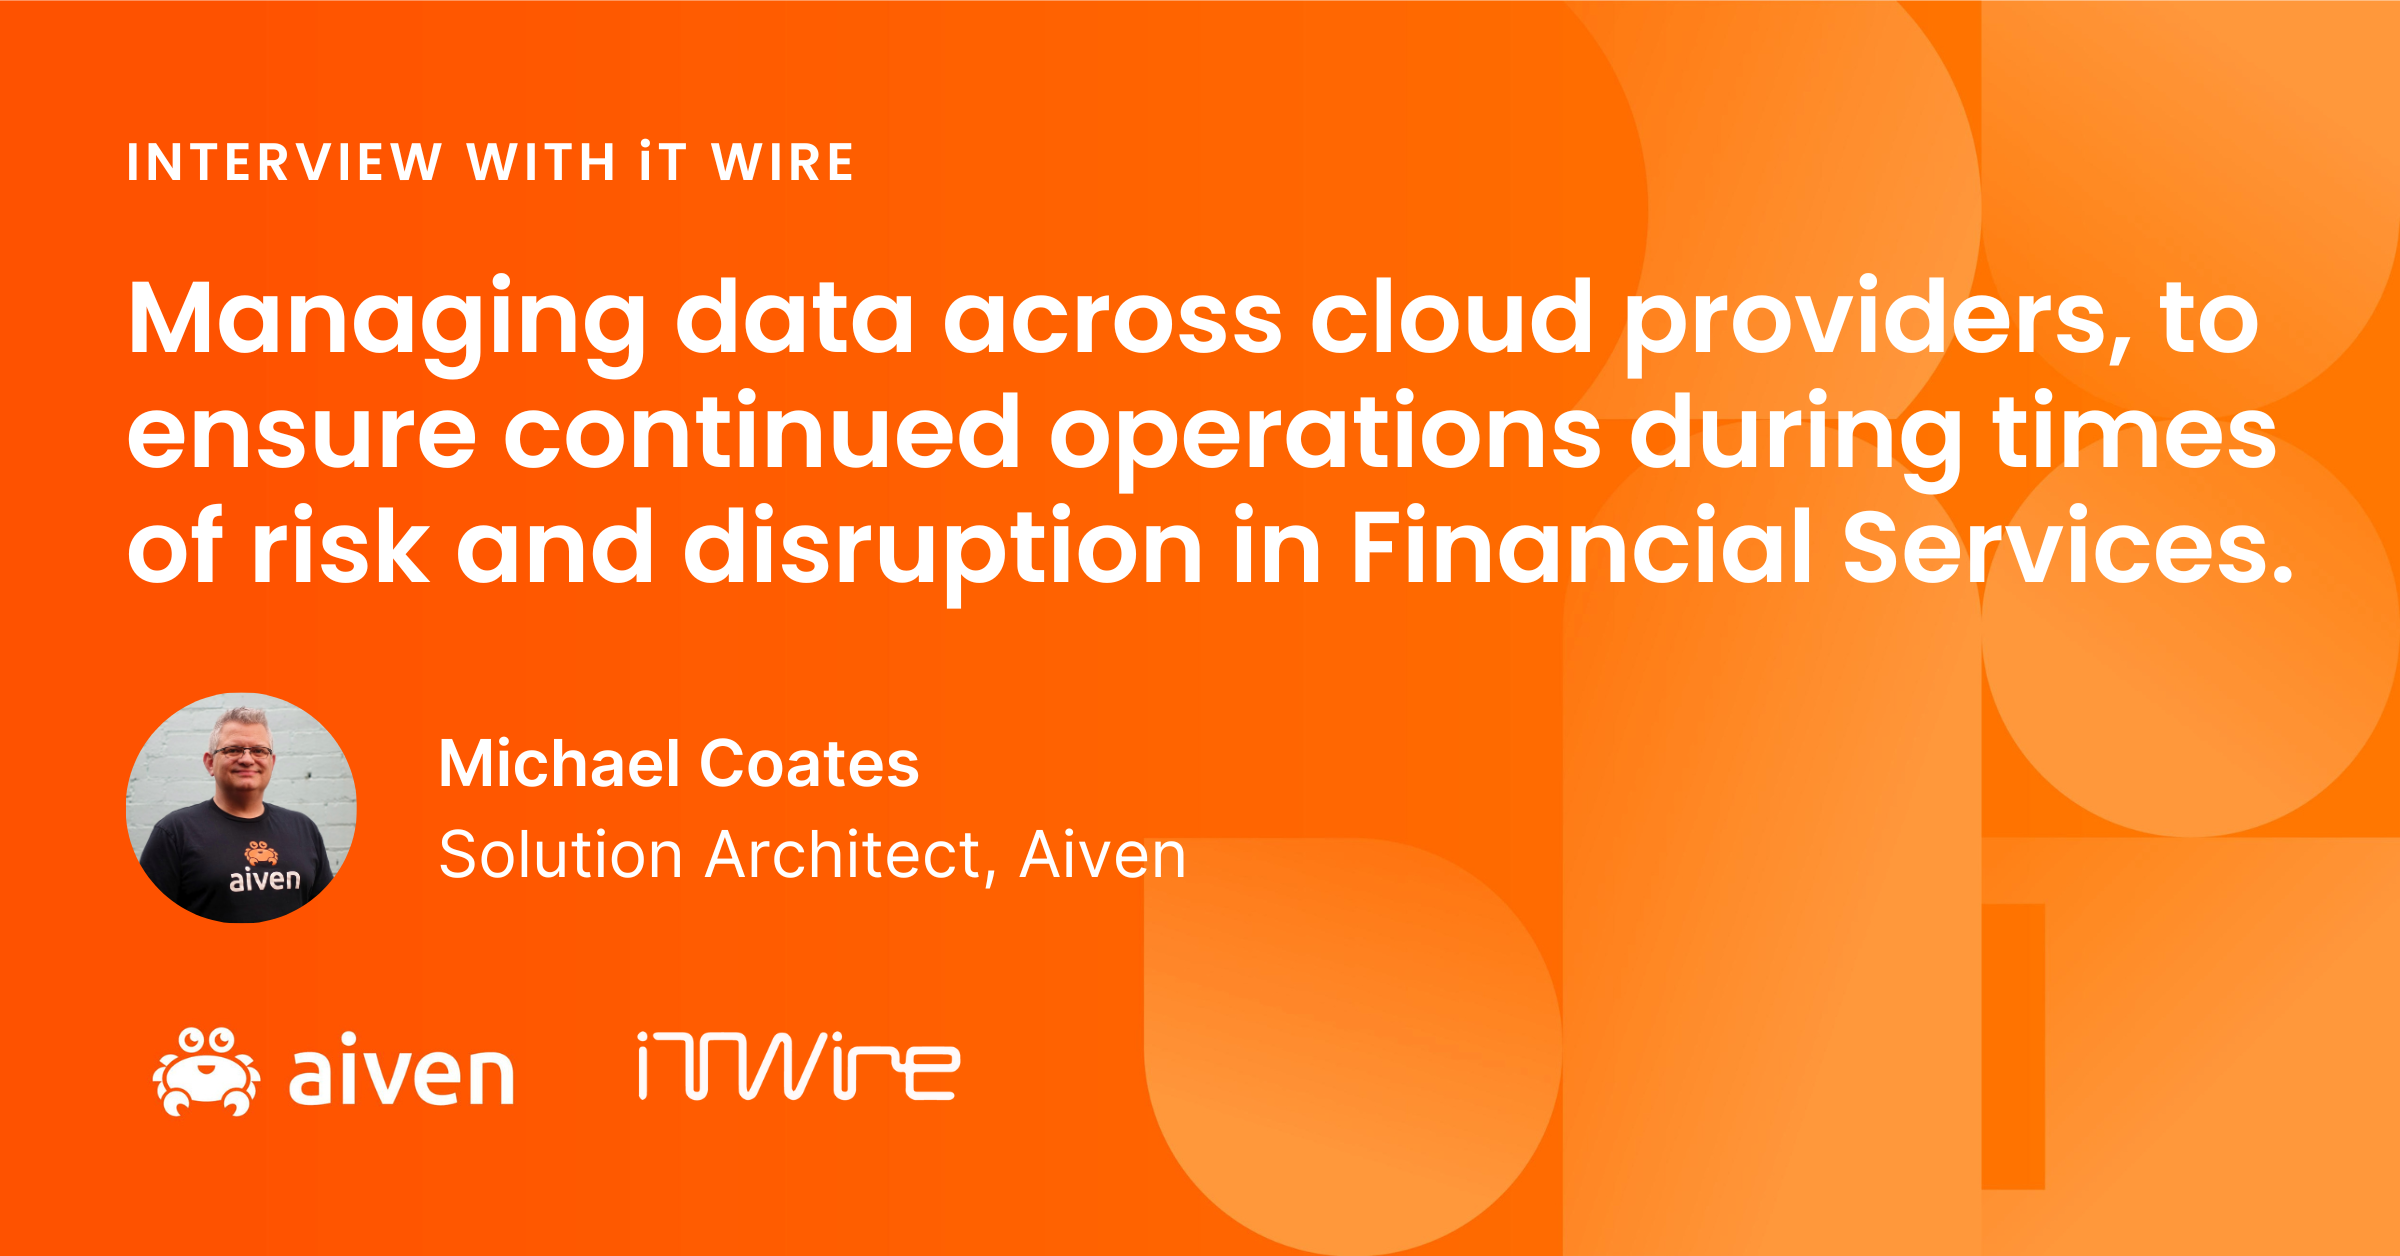 Managing data across cloud providers, to ensure continued operations during times of risk and disruption in Financial Services. illustration